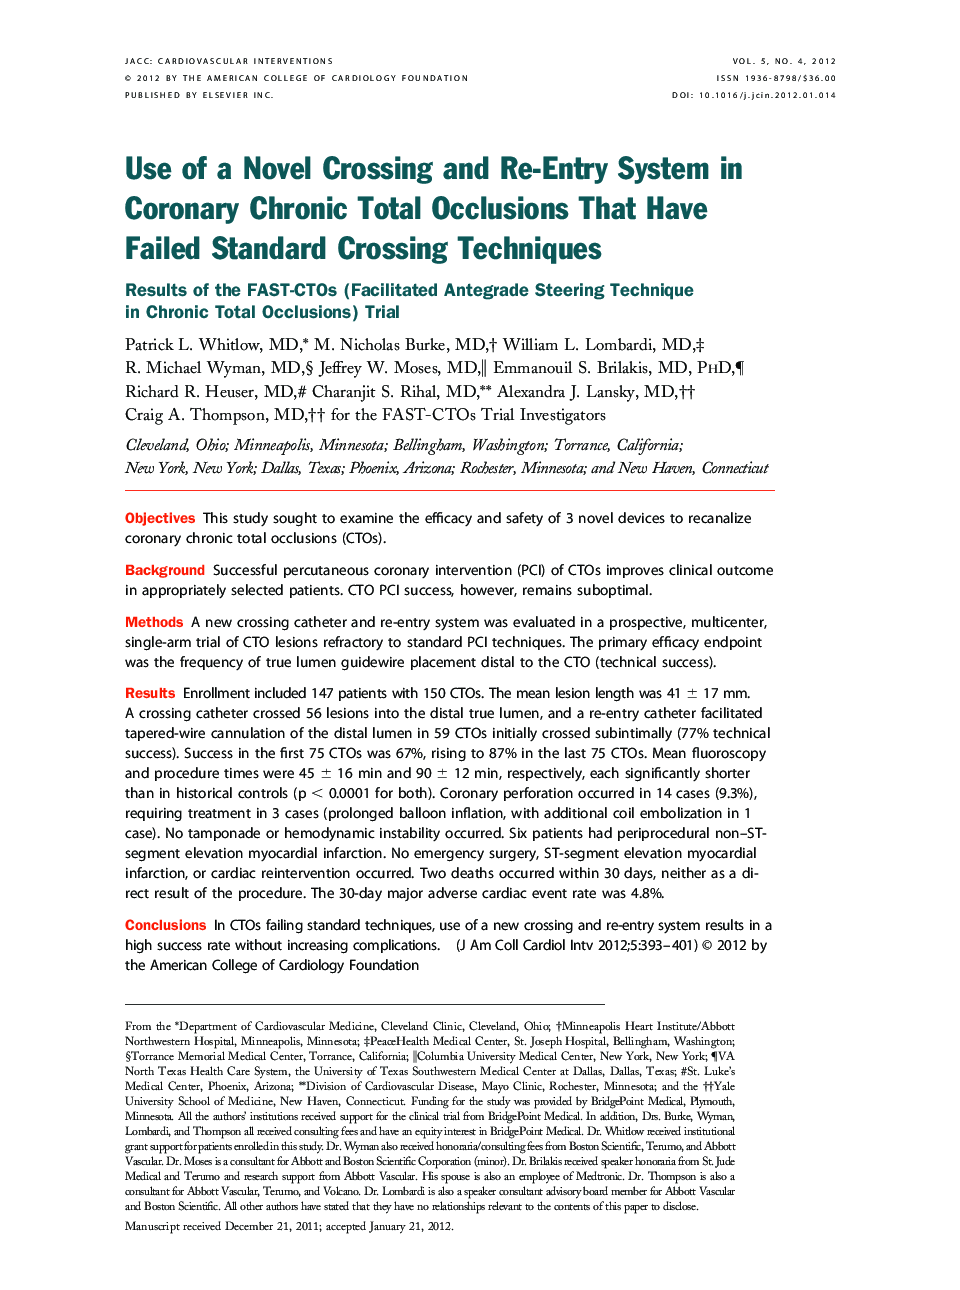 Use of a Novel Crossing and Re-Entry System in Coronary Chronic Total Occlusions That Have Failed Standard Crossing Techniques : Results of the FAST-CTOs (Facilitated Antegrade Steering Technique in Chronic Total Occlusions) Trial